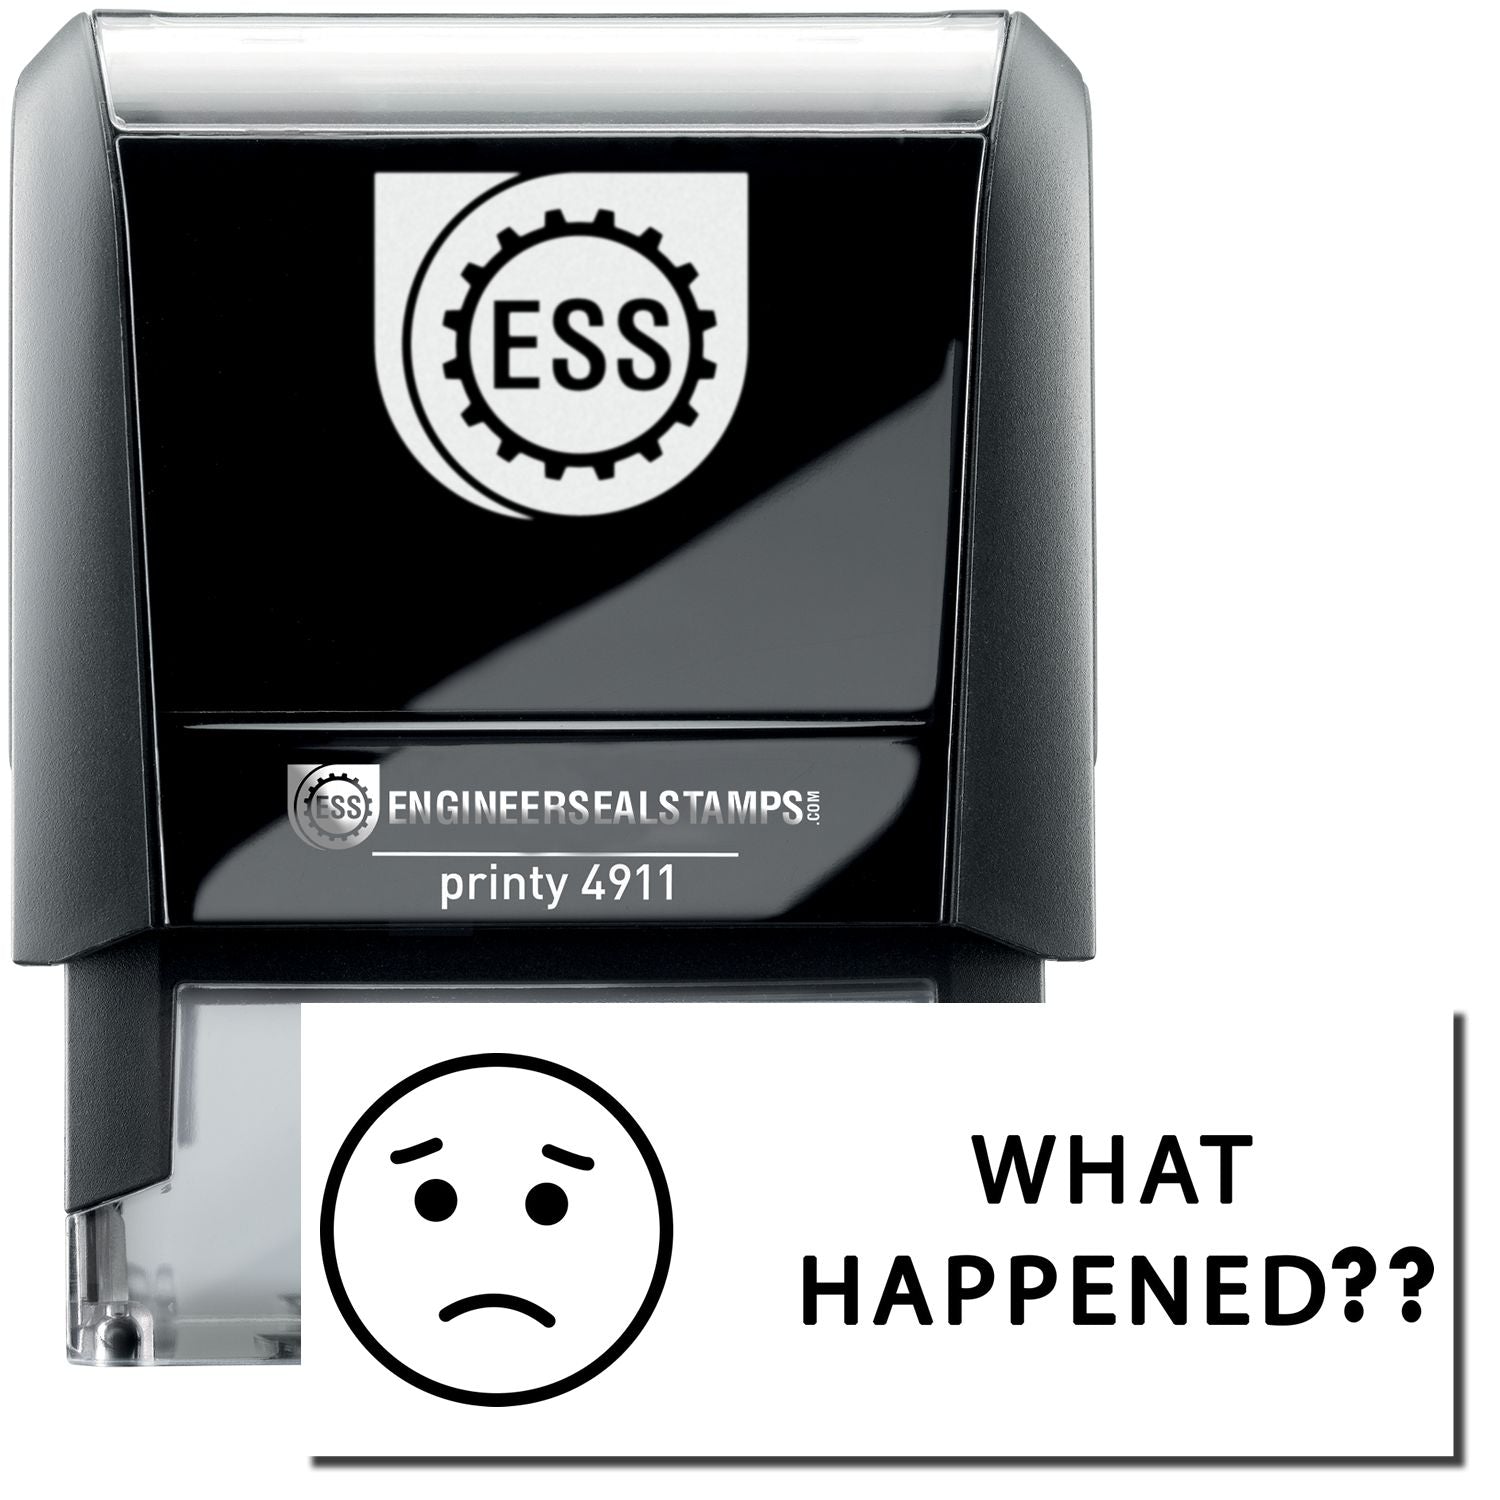 A self-inking stamp with a stamped image showing how the text "WHAT HAPPENED??" in bold font with an image of a sad face on the left is displayed after stamping.